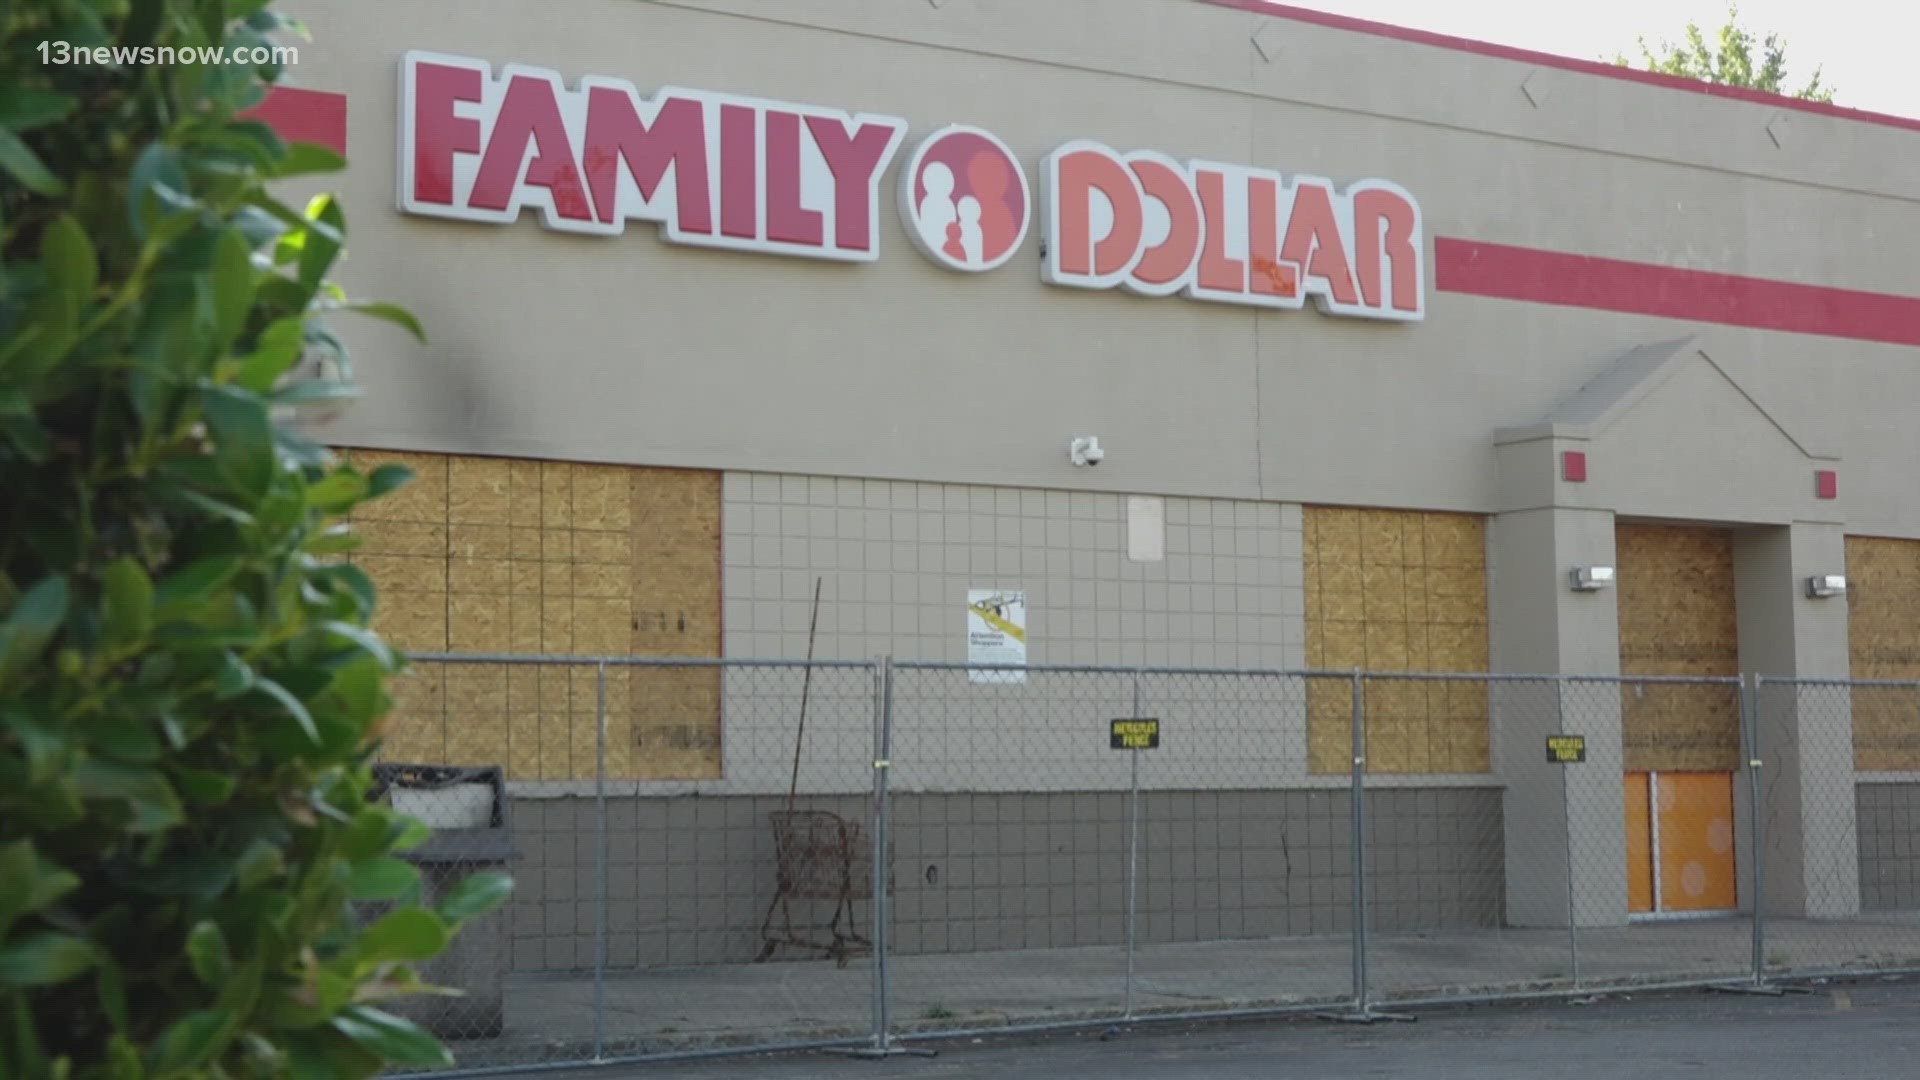 One year after a fire tore through a Family Dollar in Norfolk, there is hope for new life.